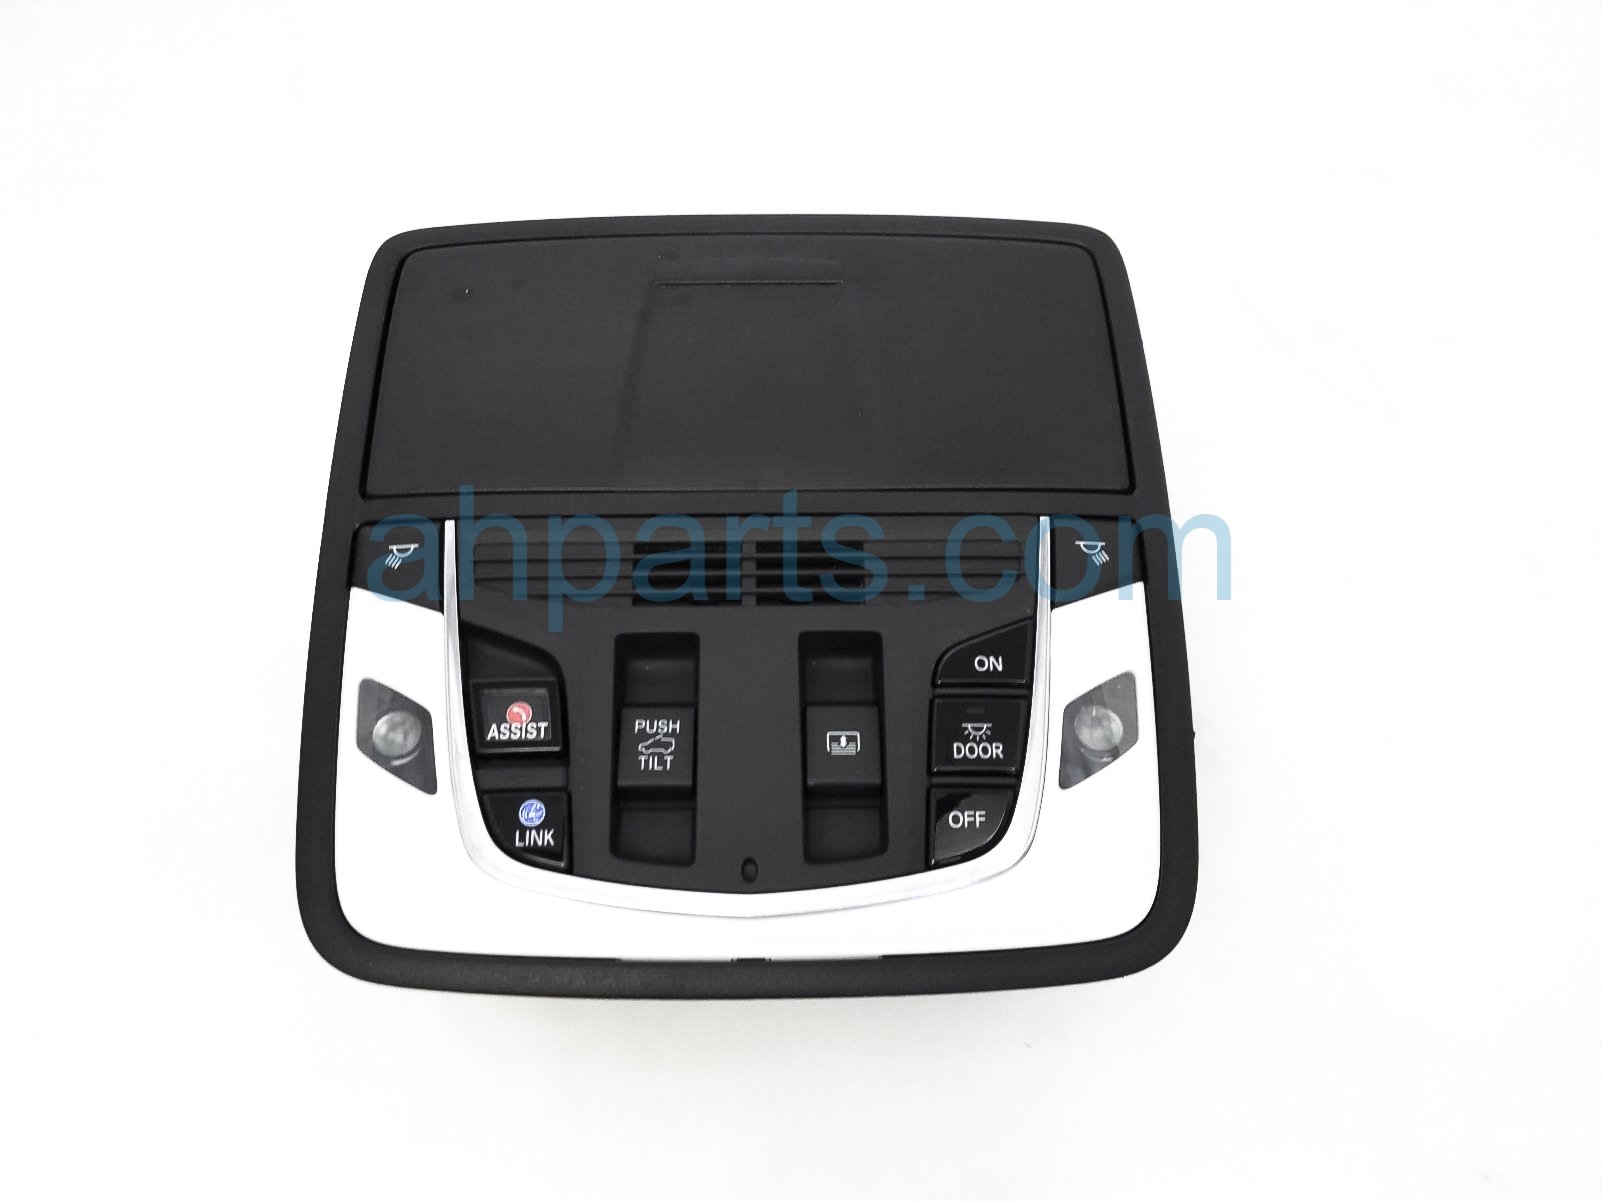 $75 Acura MAP LIGHT / ROOF CONSOLE - BLACK